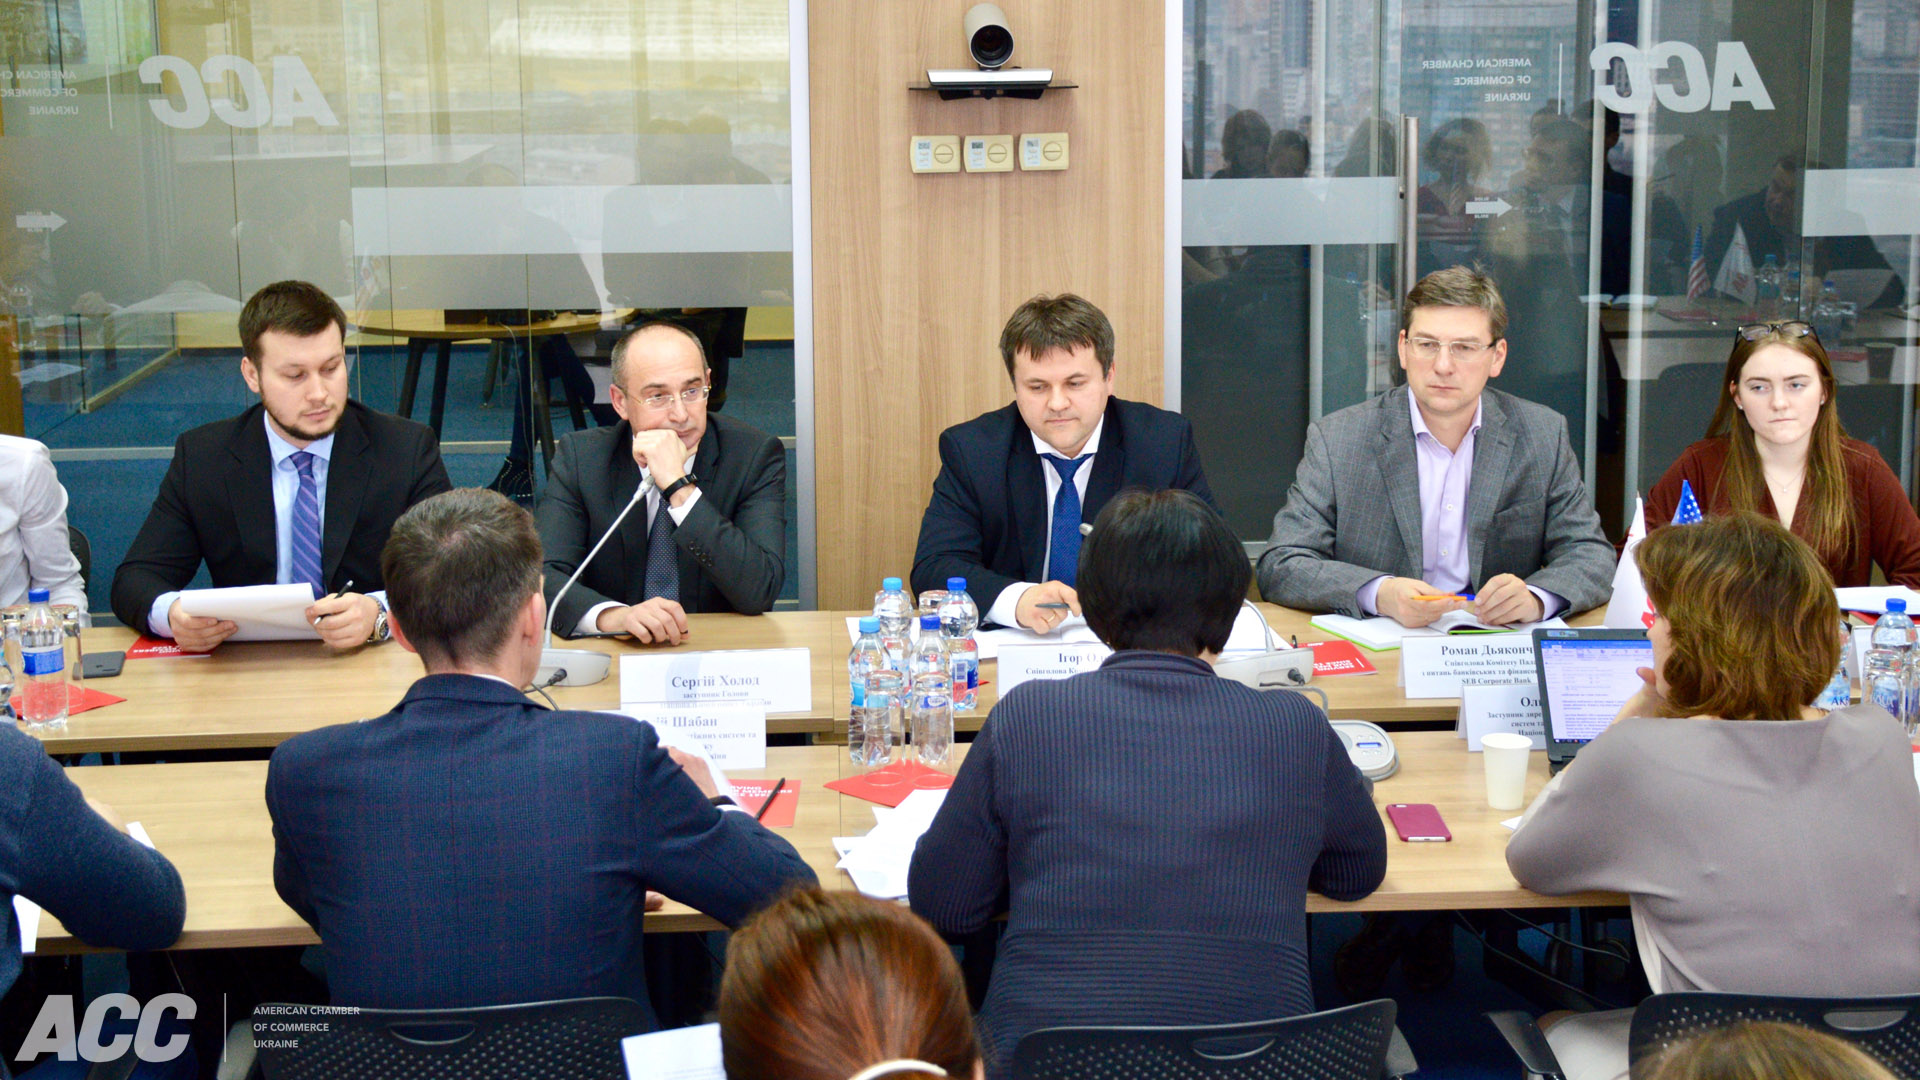 Banking & Financial Services Committee Meeting with Sergii Kholod, Deputy Governor of the National Bank of Ukraine